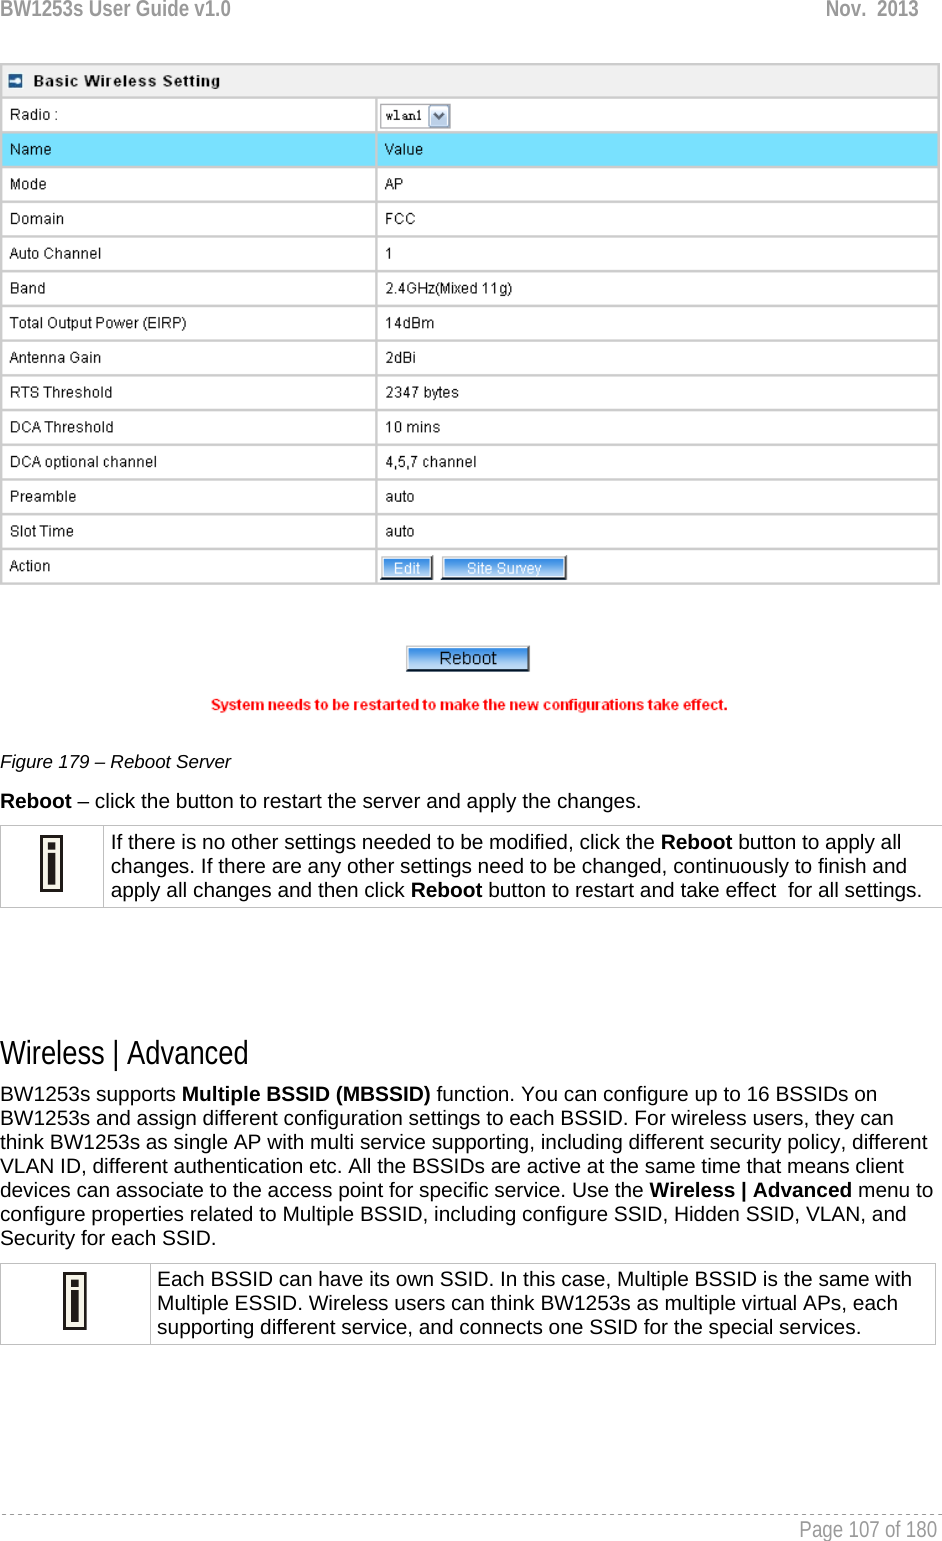 BW1253s User Guide v1.0  Nov.  2013     Page 107 of 180    Figure 179 – Reboot Server Reboot – click the button to restart the server and apply the changes.  If there is no other settings needed to be modified, click the Reboot button to apply all changes. If there are any other settings need to be changed, continuously to finish and apply all changes and then click Reboot button to restart and take effect  for all settings.    Wireless | Advanced  BW1253s supports Multiple BSSID (MBSSID) function. You can configure up to 16 BSSIDs on BW1253s and assign different configuration settings to each BSSID. For wireless users, they can think BW1253s as single AP with multi service supporting, including different security policy, different VLAN ID, different authentication etc. All the BSSIDs are active at the same time that means client devices can associate to the access point for specific service. Use the Wireless | Advanced menu to configure properties related to Multiple BSSID, including configure SSID, Hidden SSID, VLAN, and Security for each SSID.  Each BSSID can have its own SSID. In this case, Multiple BSSID is the same with Multiple ESSID. Wireless users can think BW1253s as multiple virtual APs, each supporting different service, and connects one SSID for the special services.    